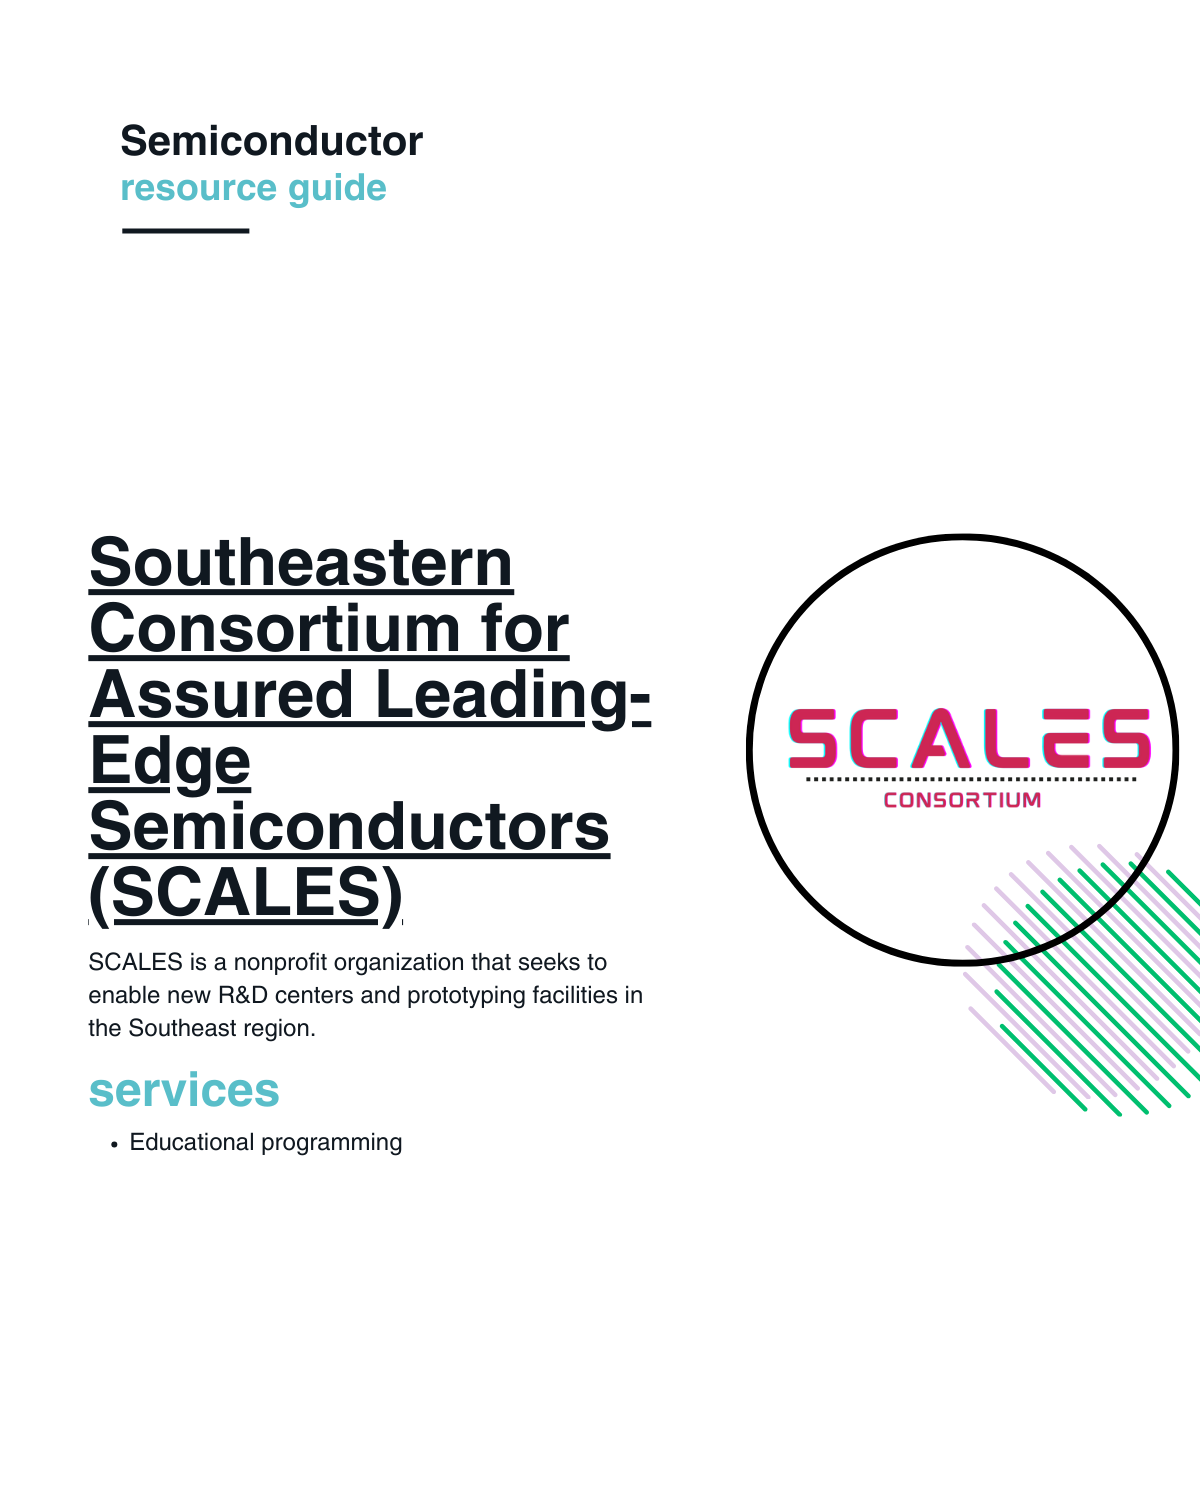 SCALES is a nonprofit organization that seeks to enable new R&D centers and prototyping facilities in the Southeast region.